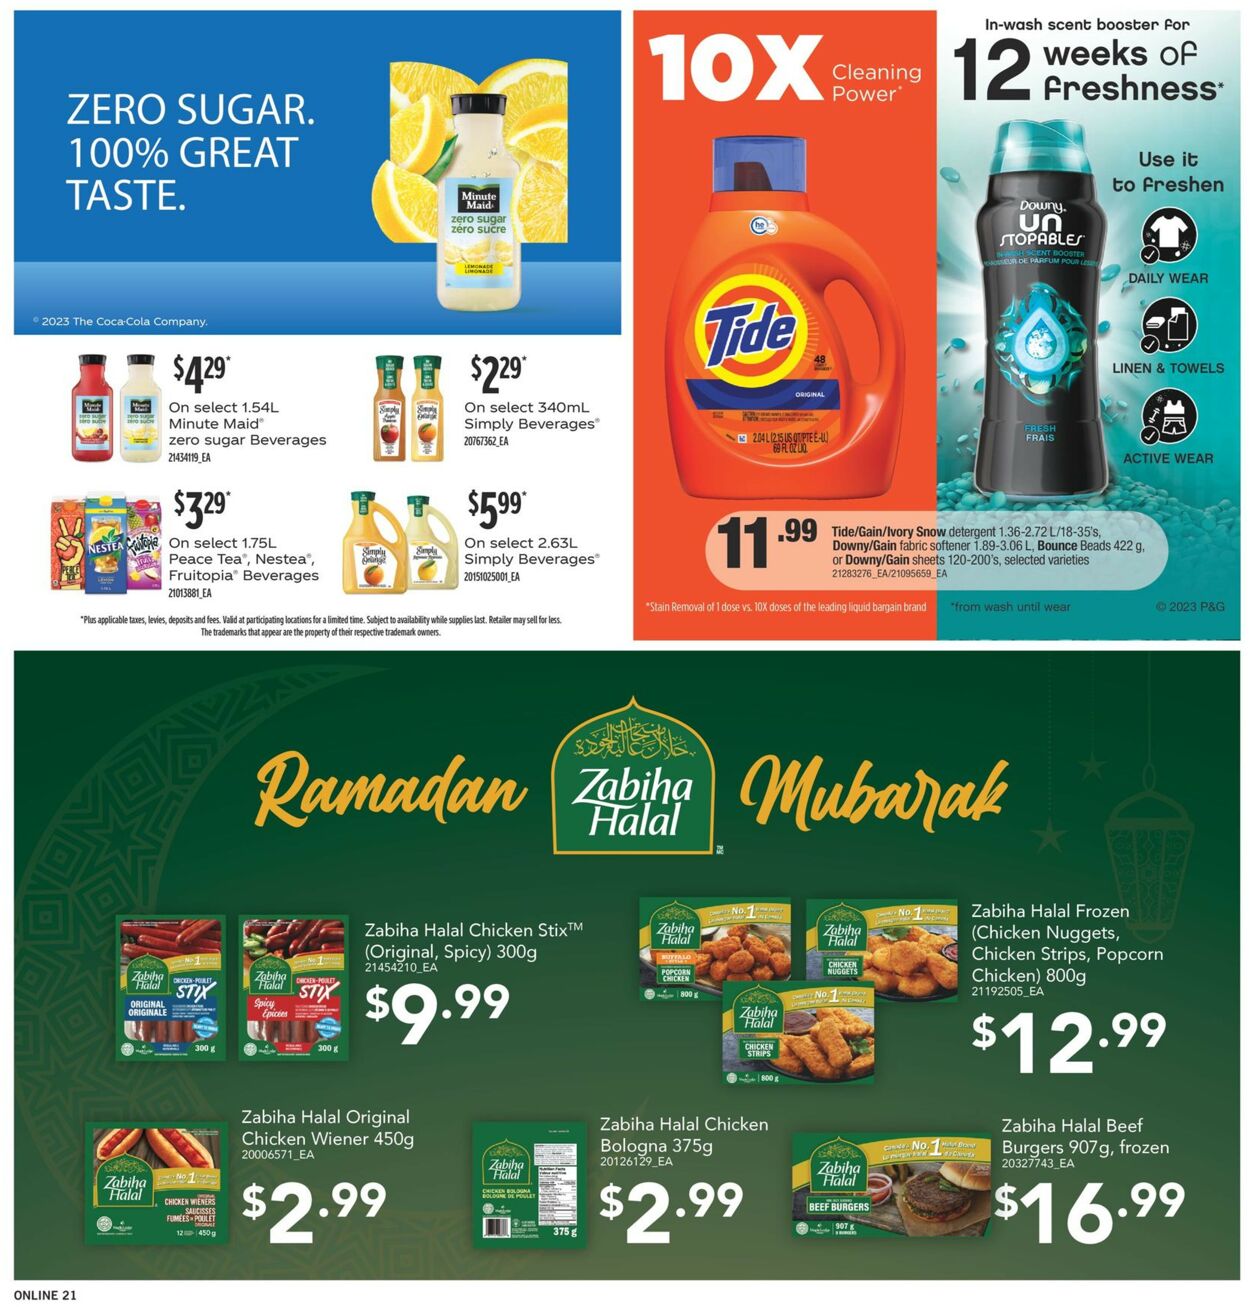 Fortinos Flyer from 03/16/2023